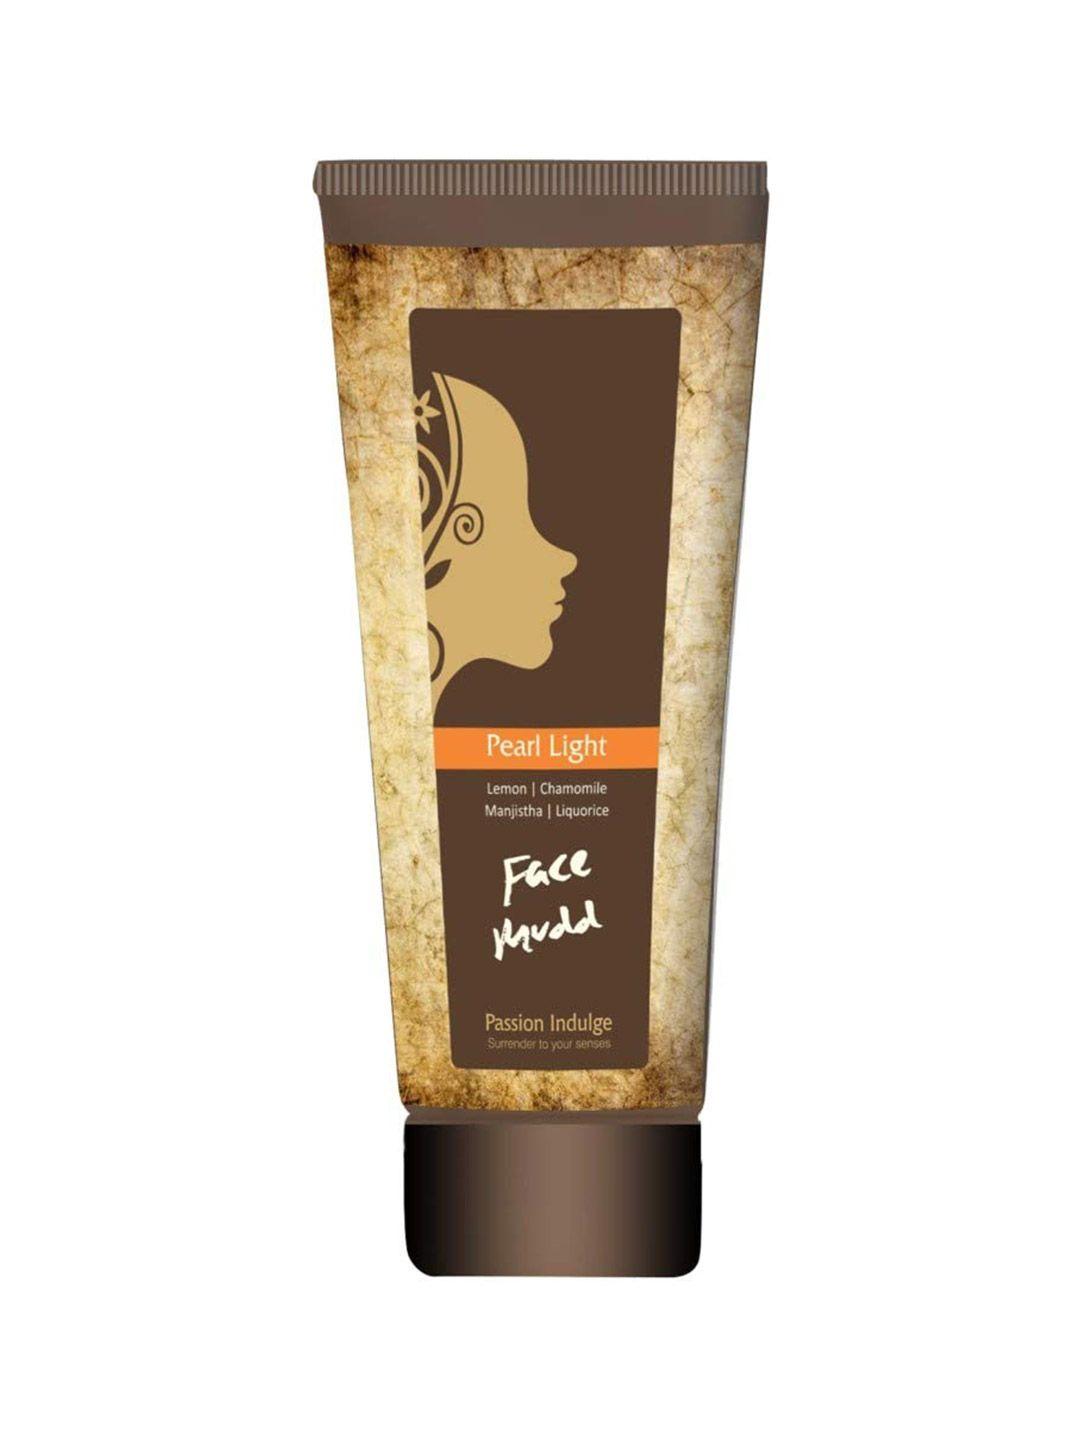 passion indulge pearl light face mudd pack 120g